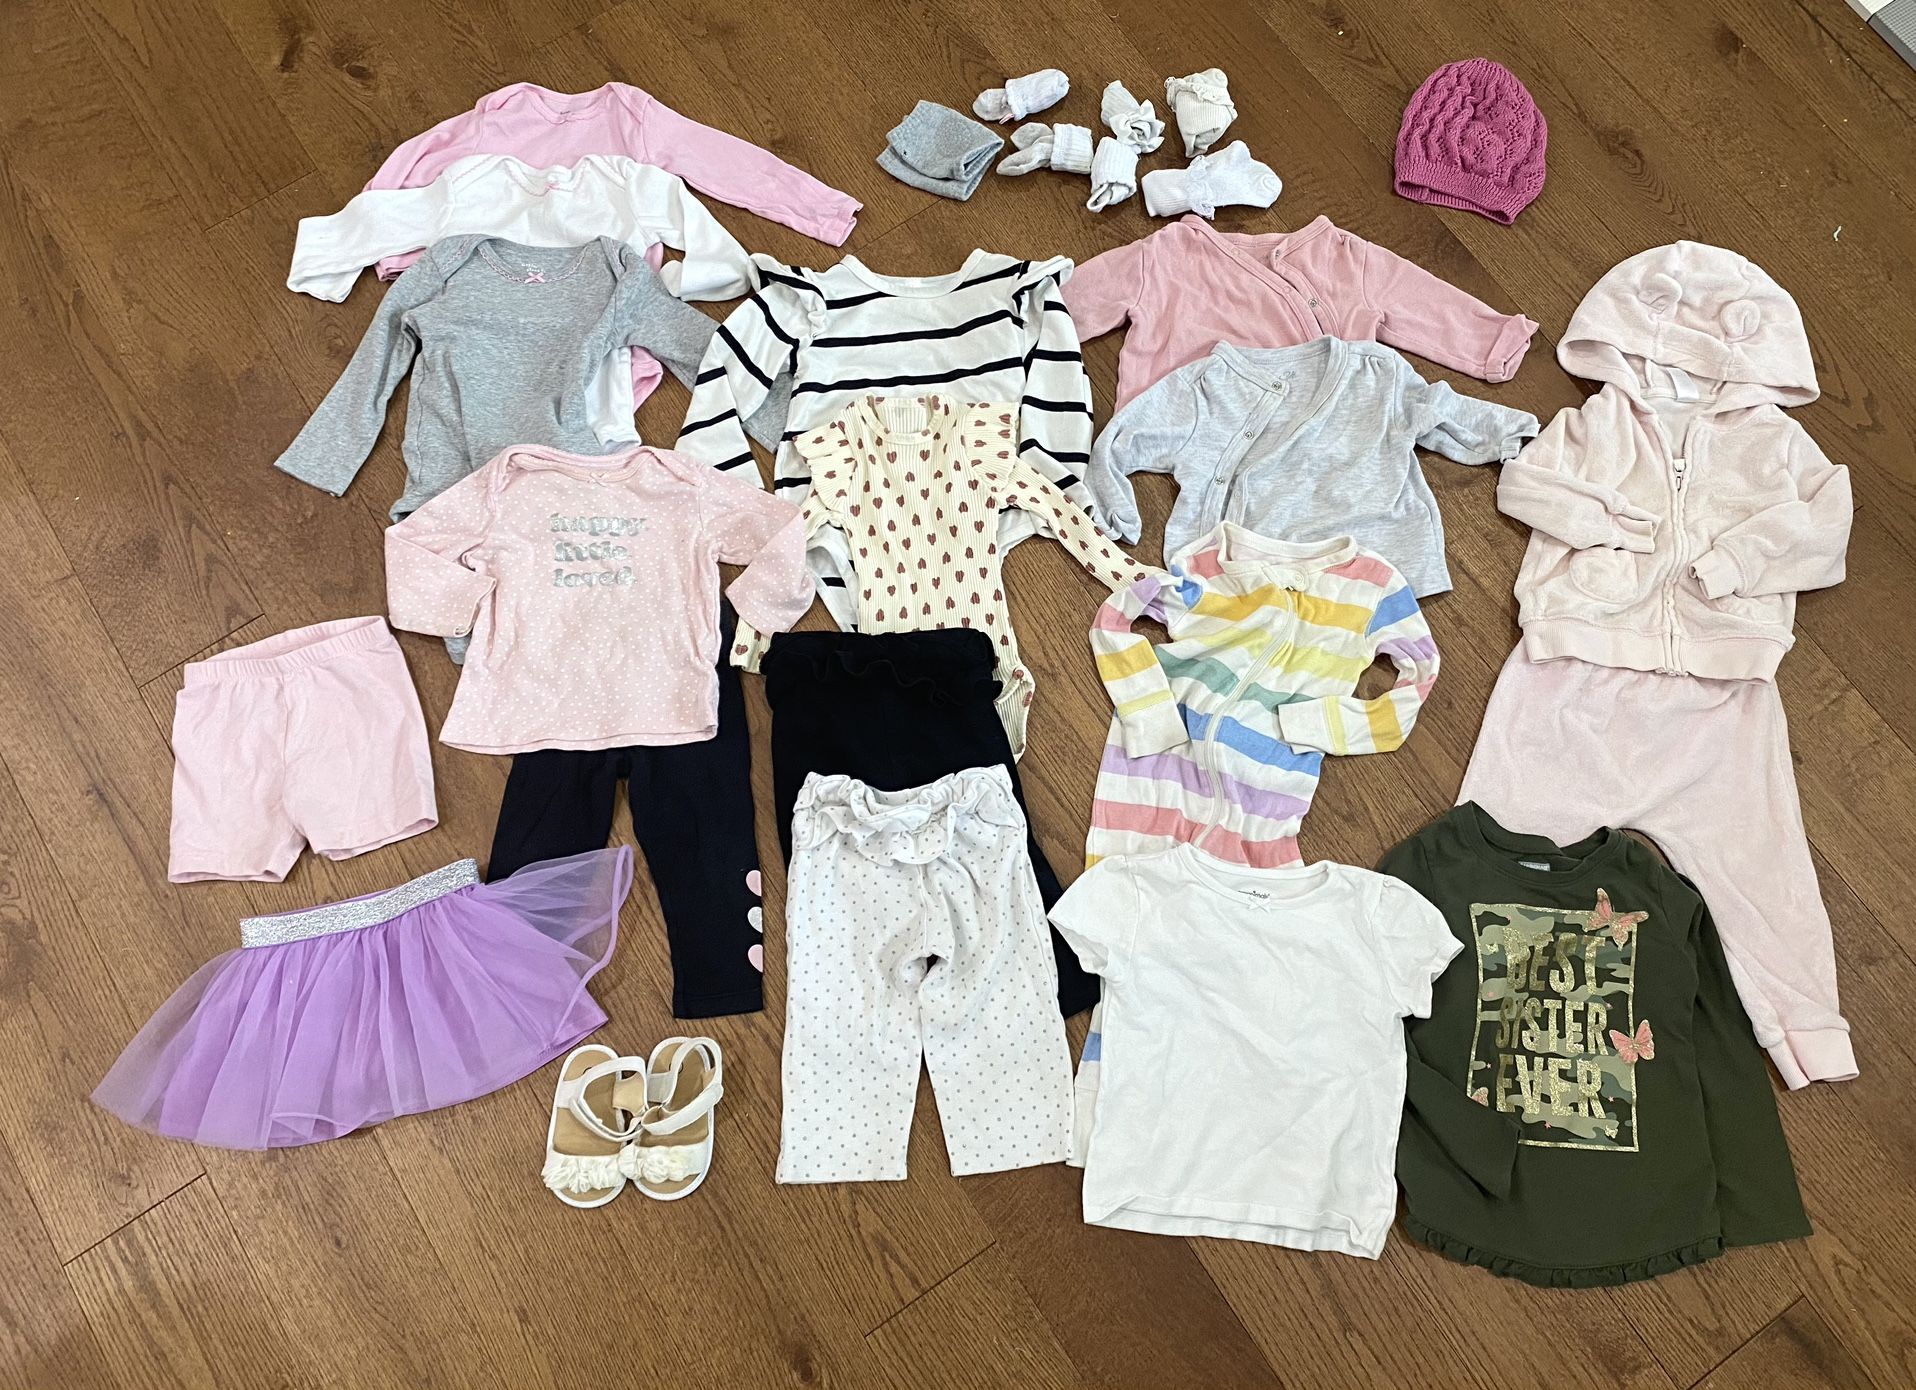 Baby Girl Cloths. 1-2 Year Old. Very Good Condition. 27 Pieces